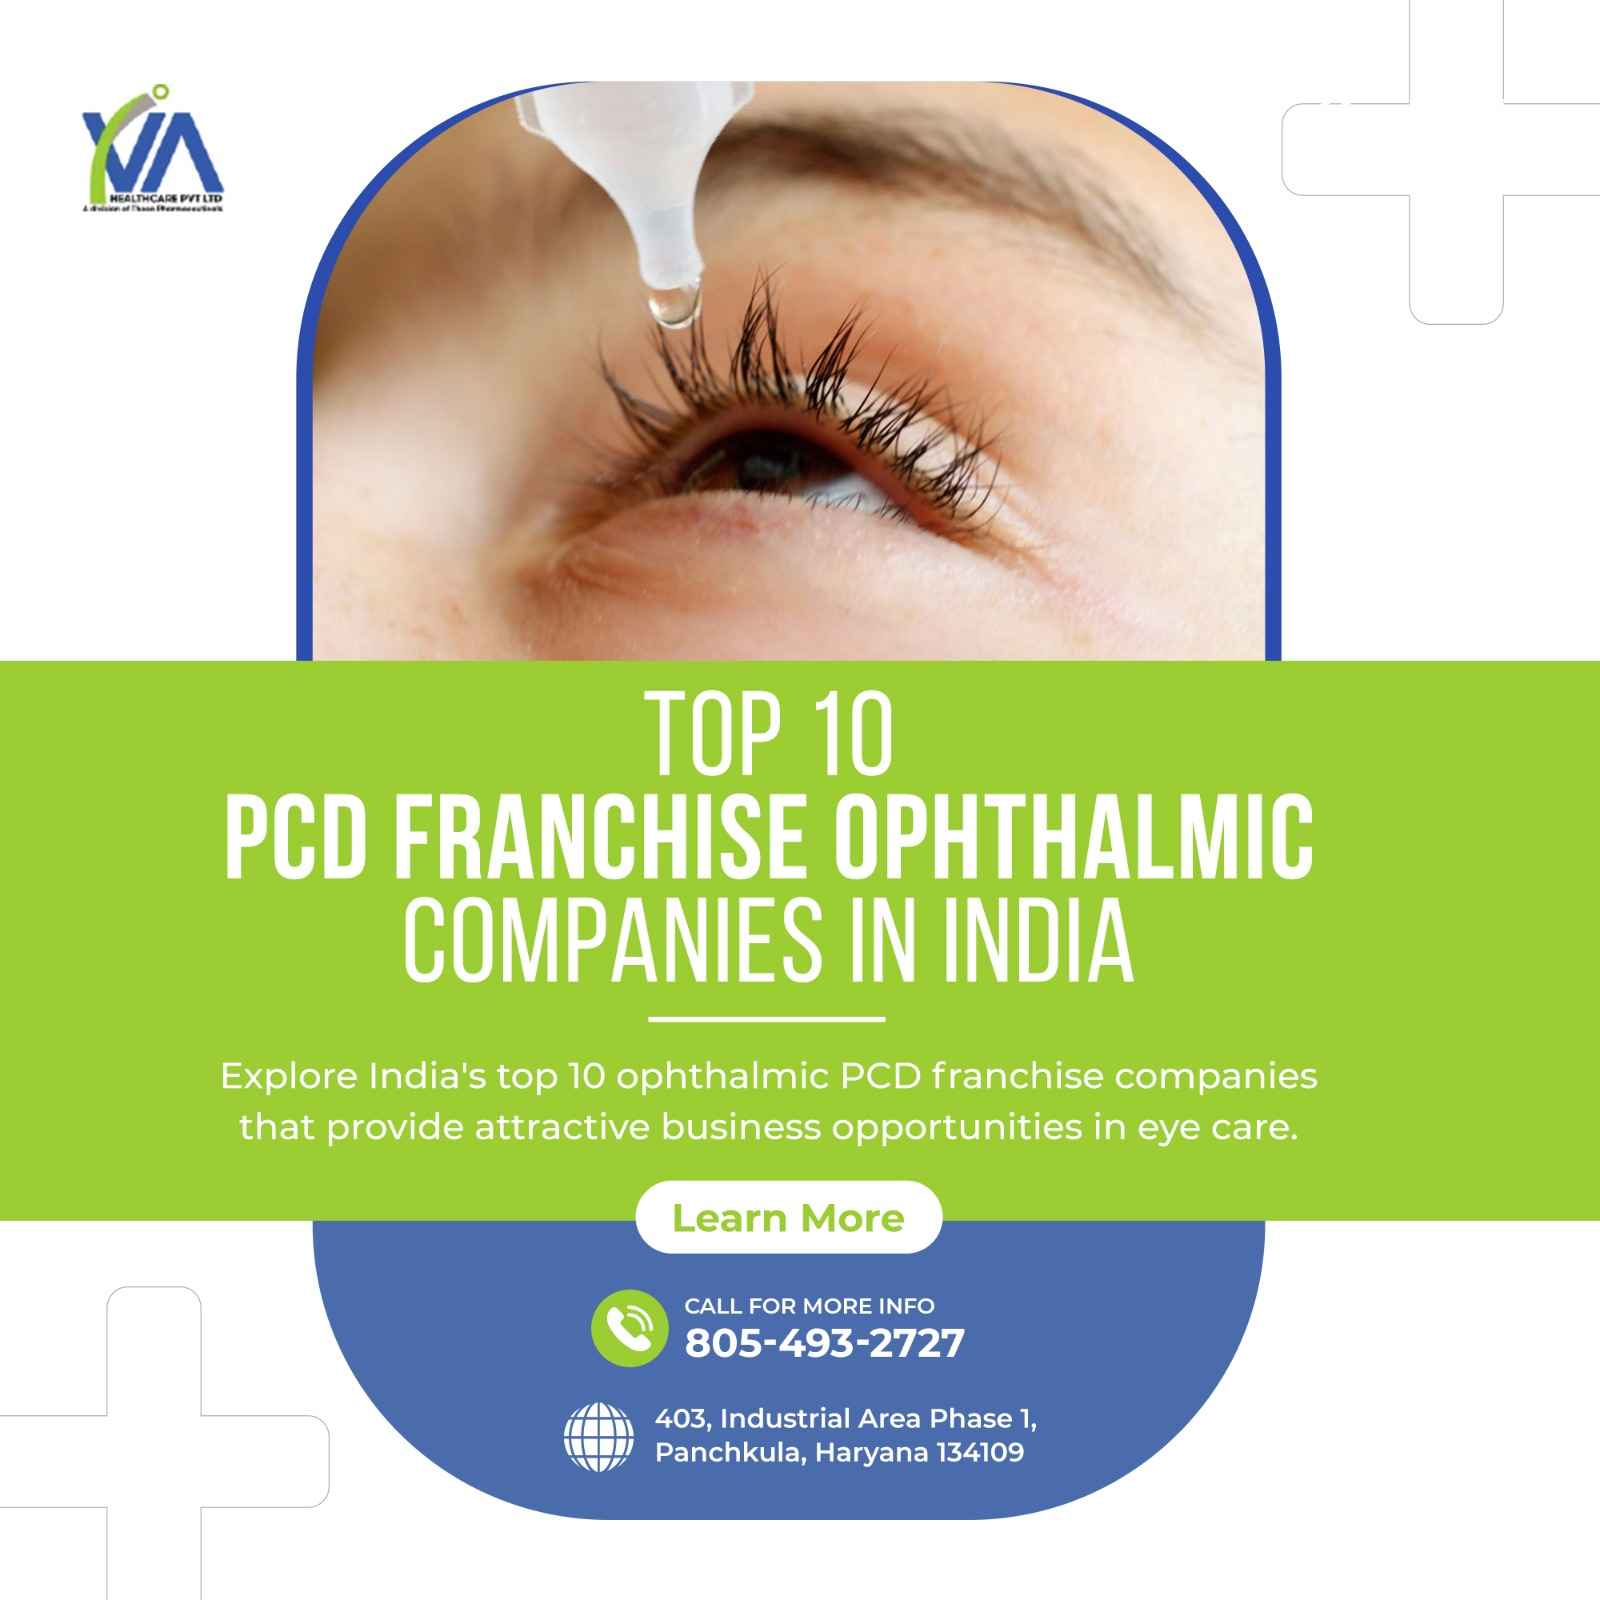 Top 10 PCD Franchise Ophthalmic Companies in India